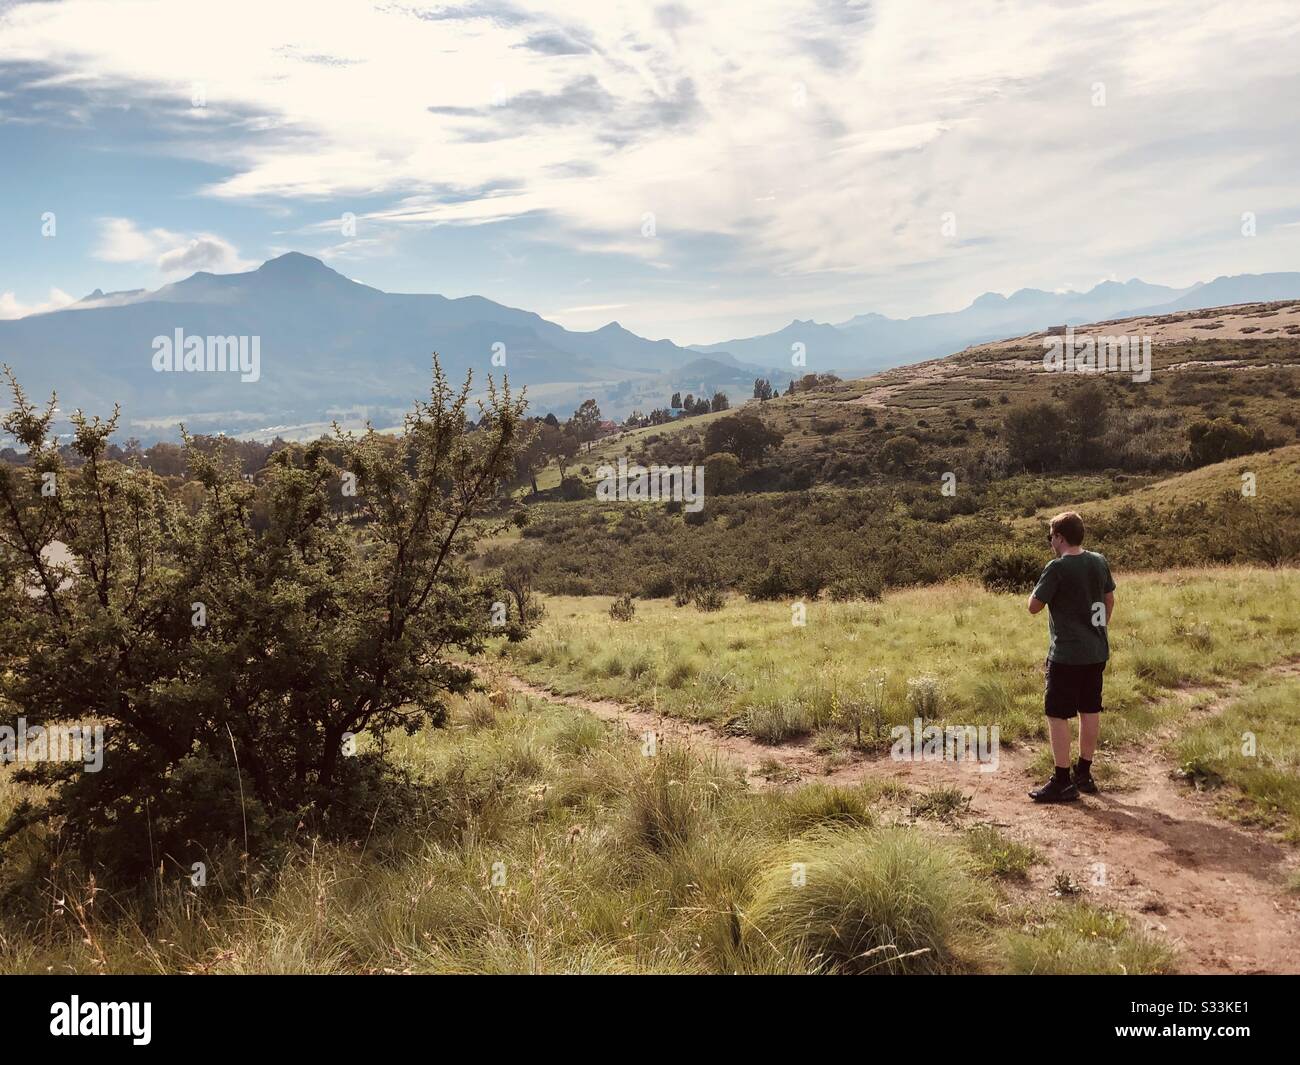 Hiking amongst the mountains in Clarens, South Africa Stock Photo